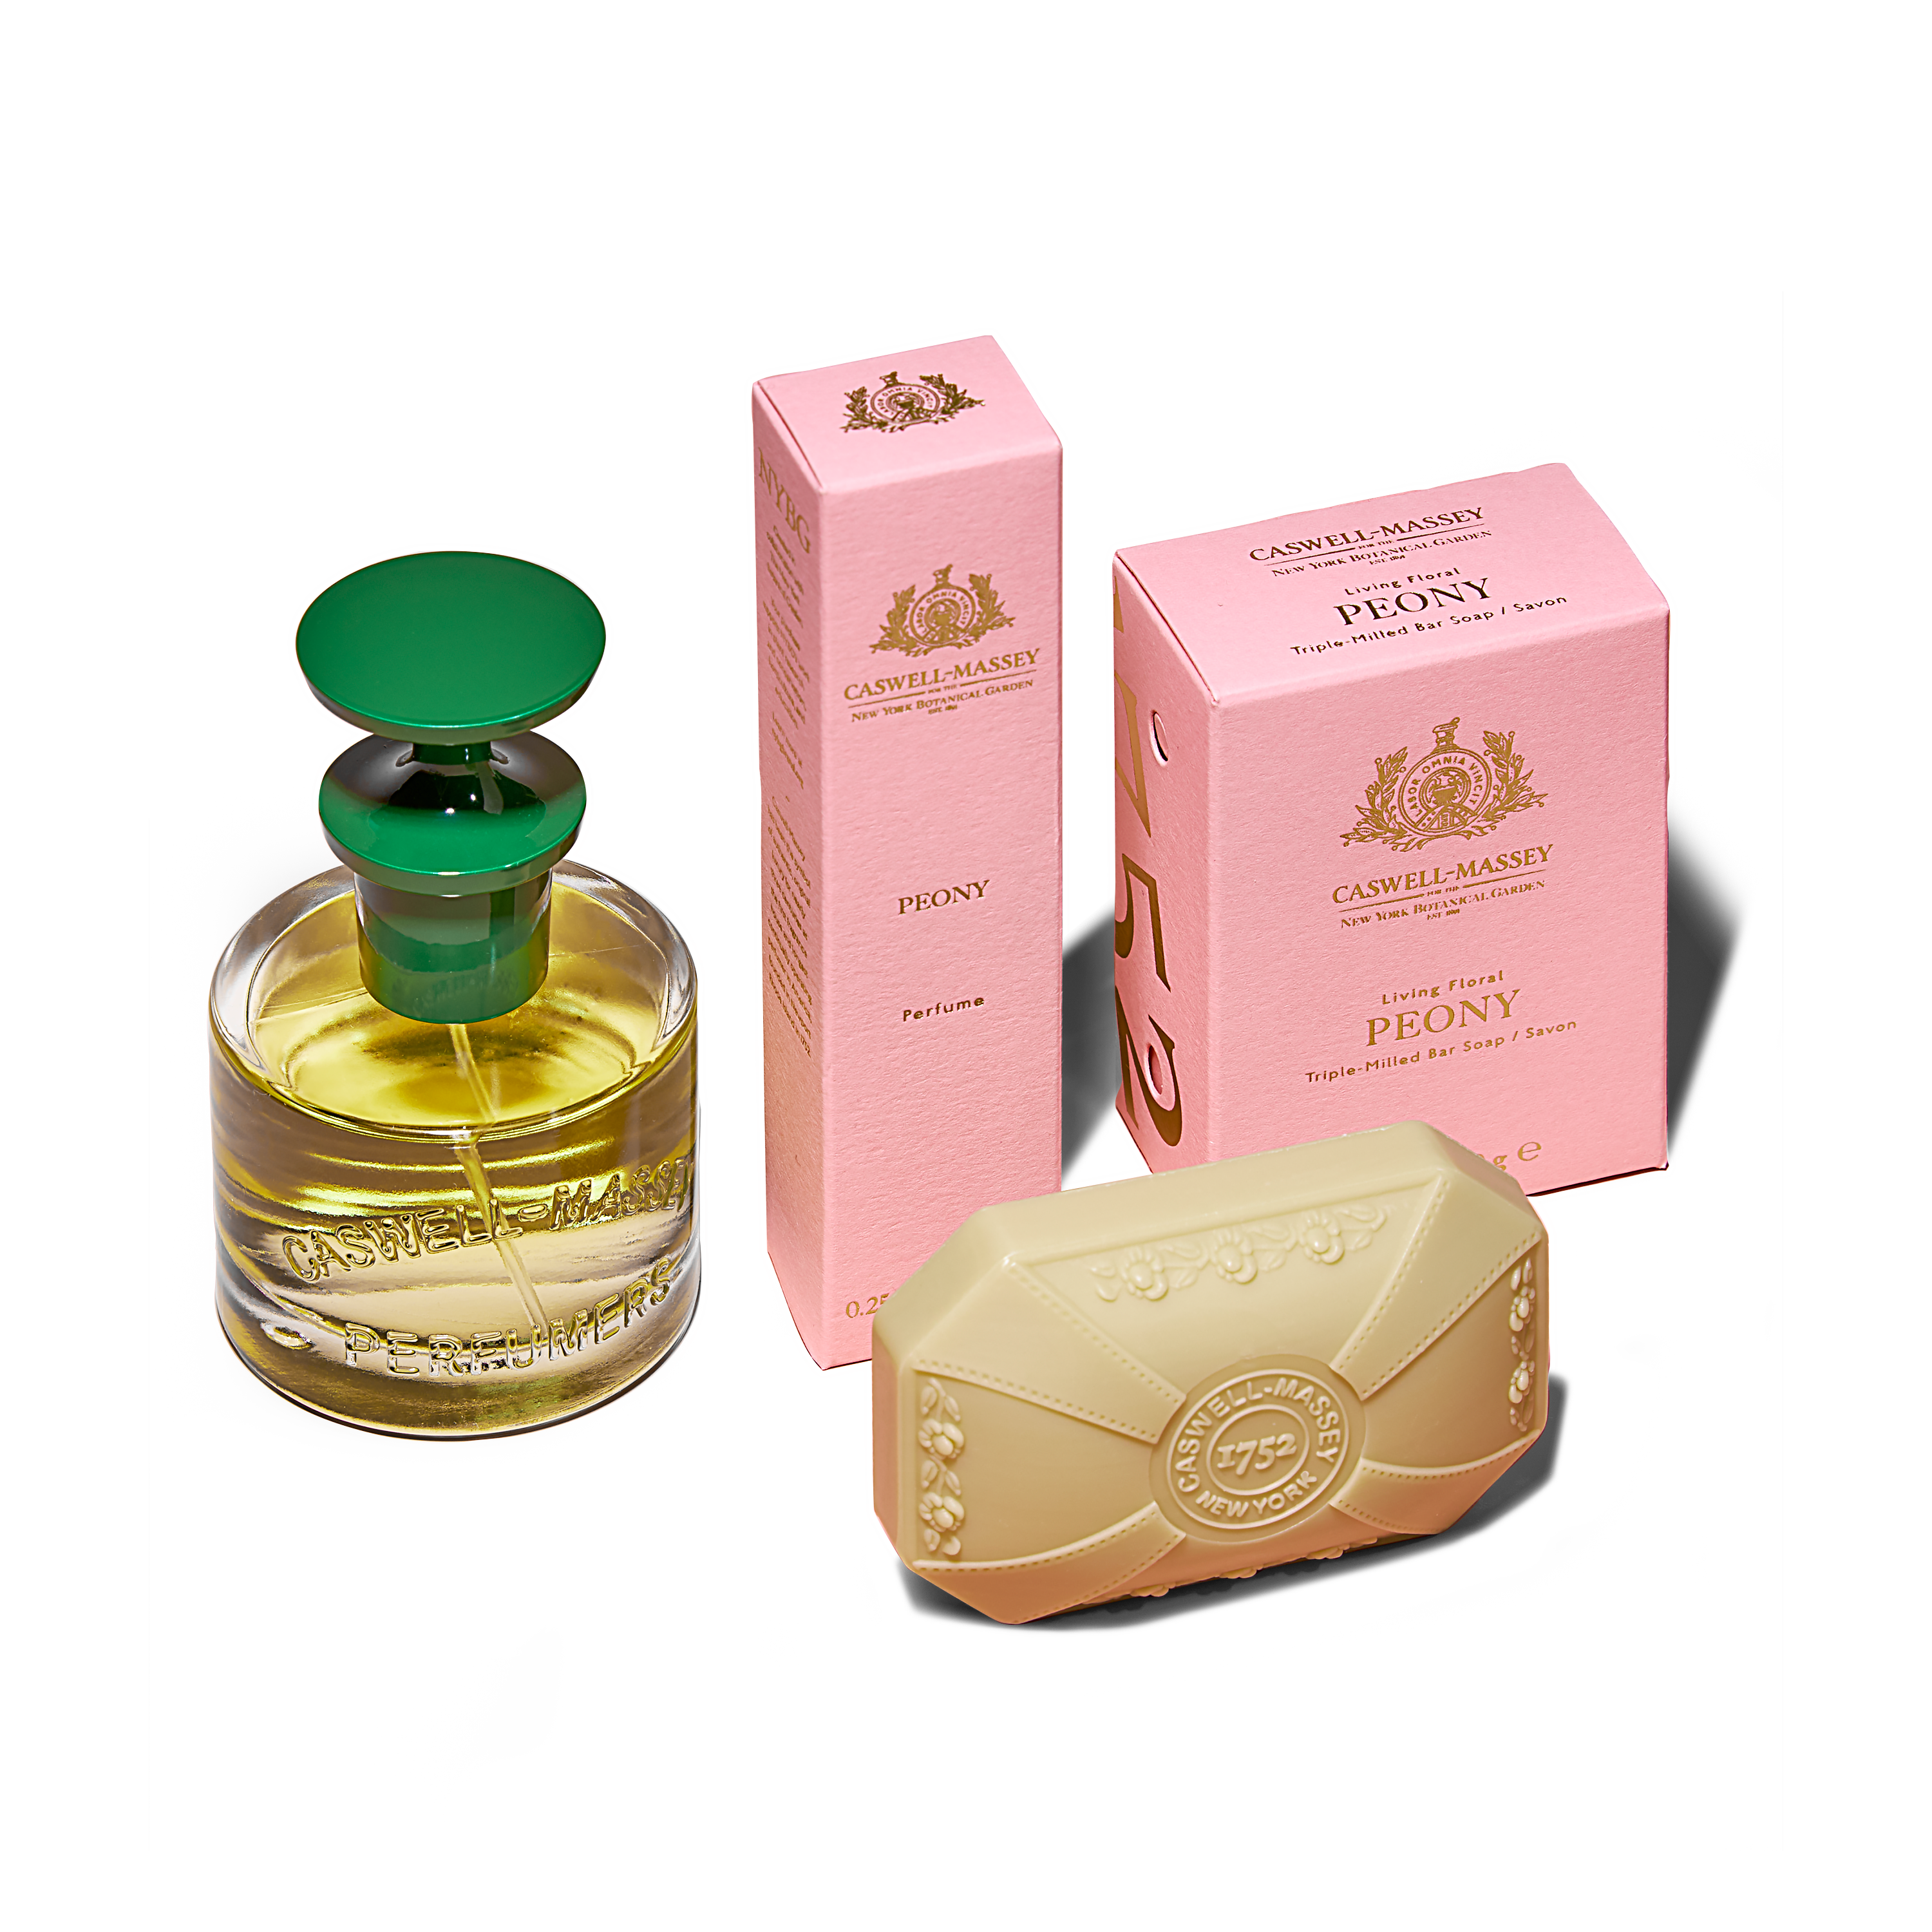 Caswell-Massey Peony Perfume for Women showing full-size 60ml, travel-size 7.5ml, and Peony Bath Soap